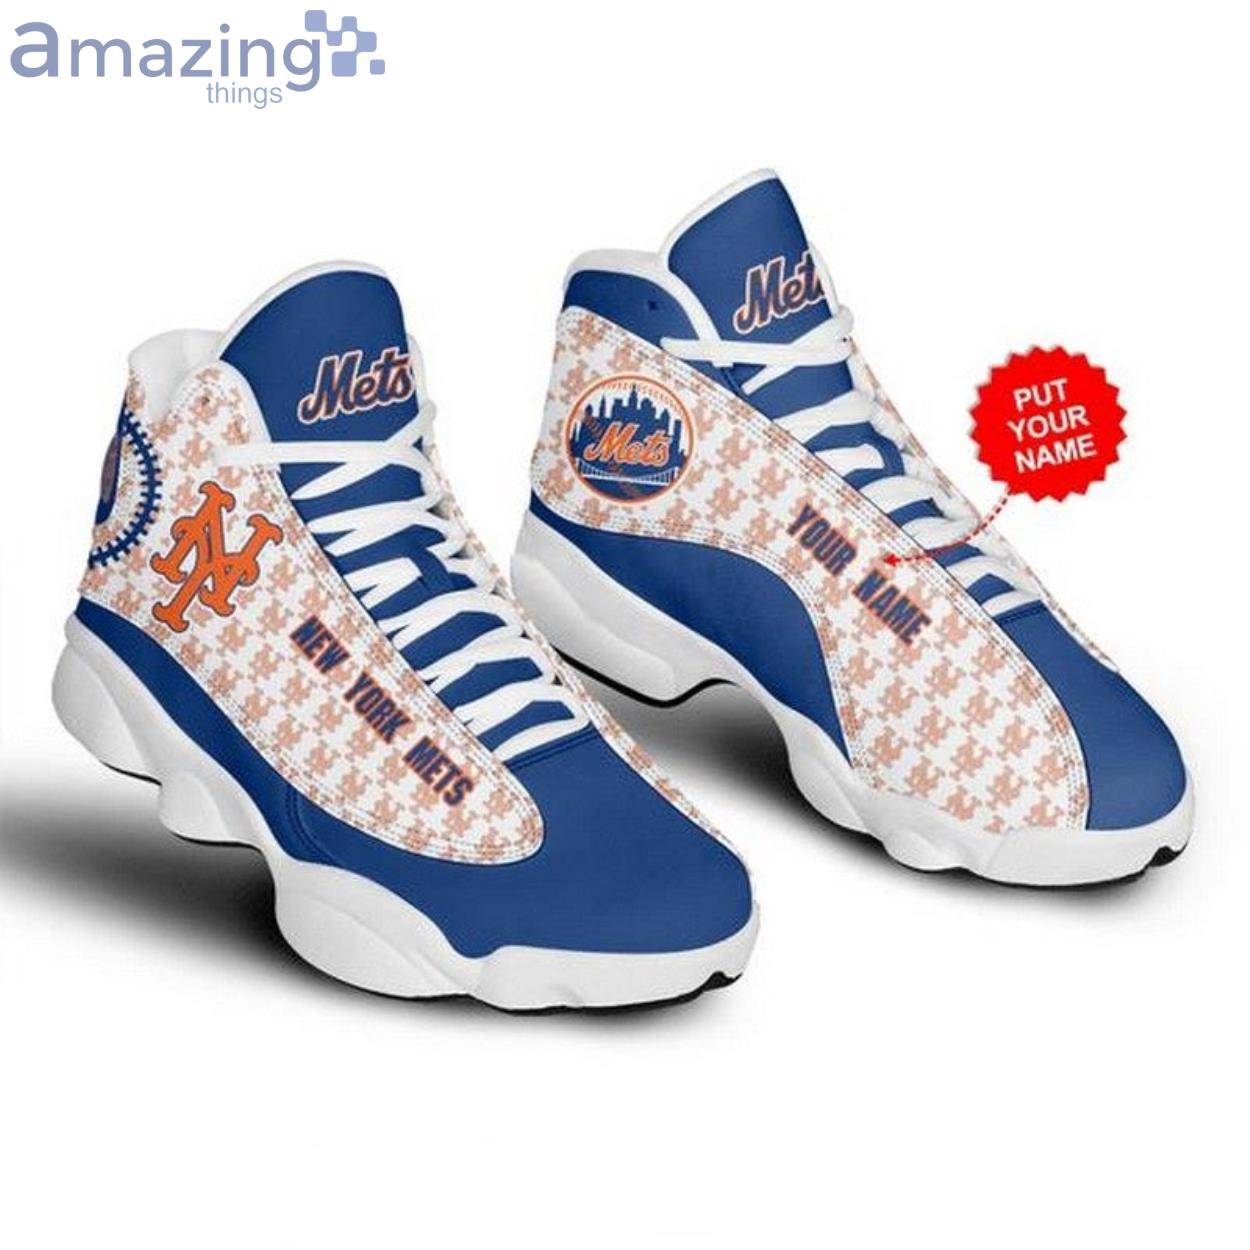 Mlb New York Yankees Air Jordan 13 Shoe For Baseball Lovers New Design8 -  The Clothes You'll Ever Need